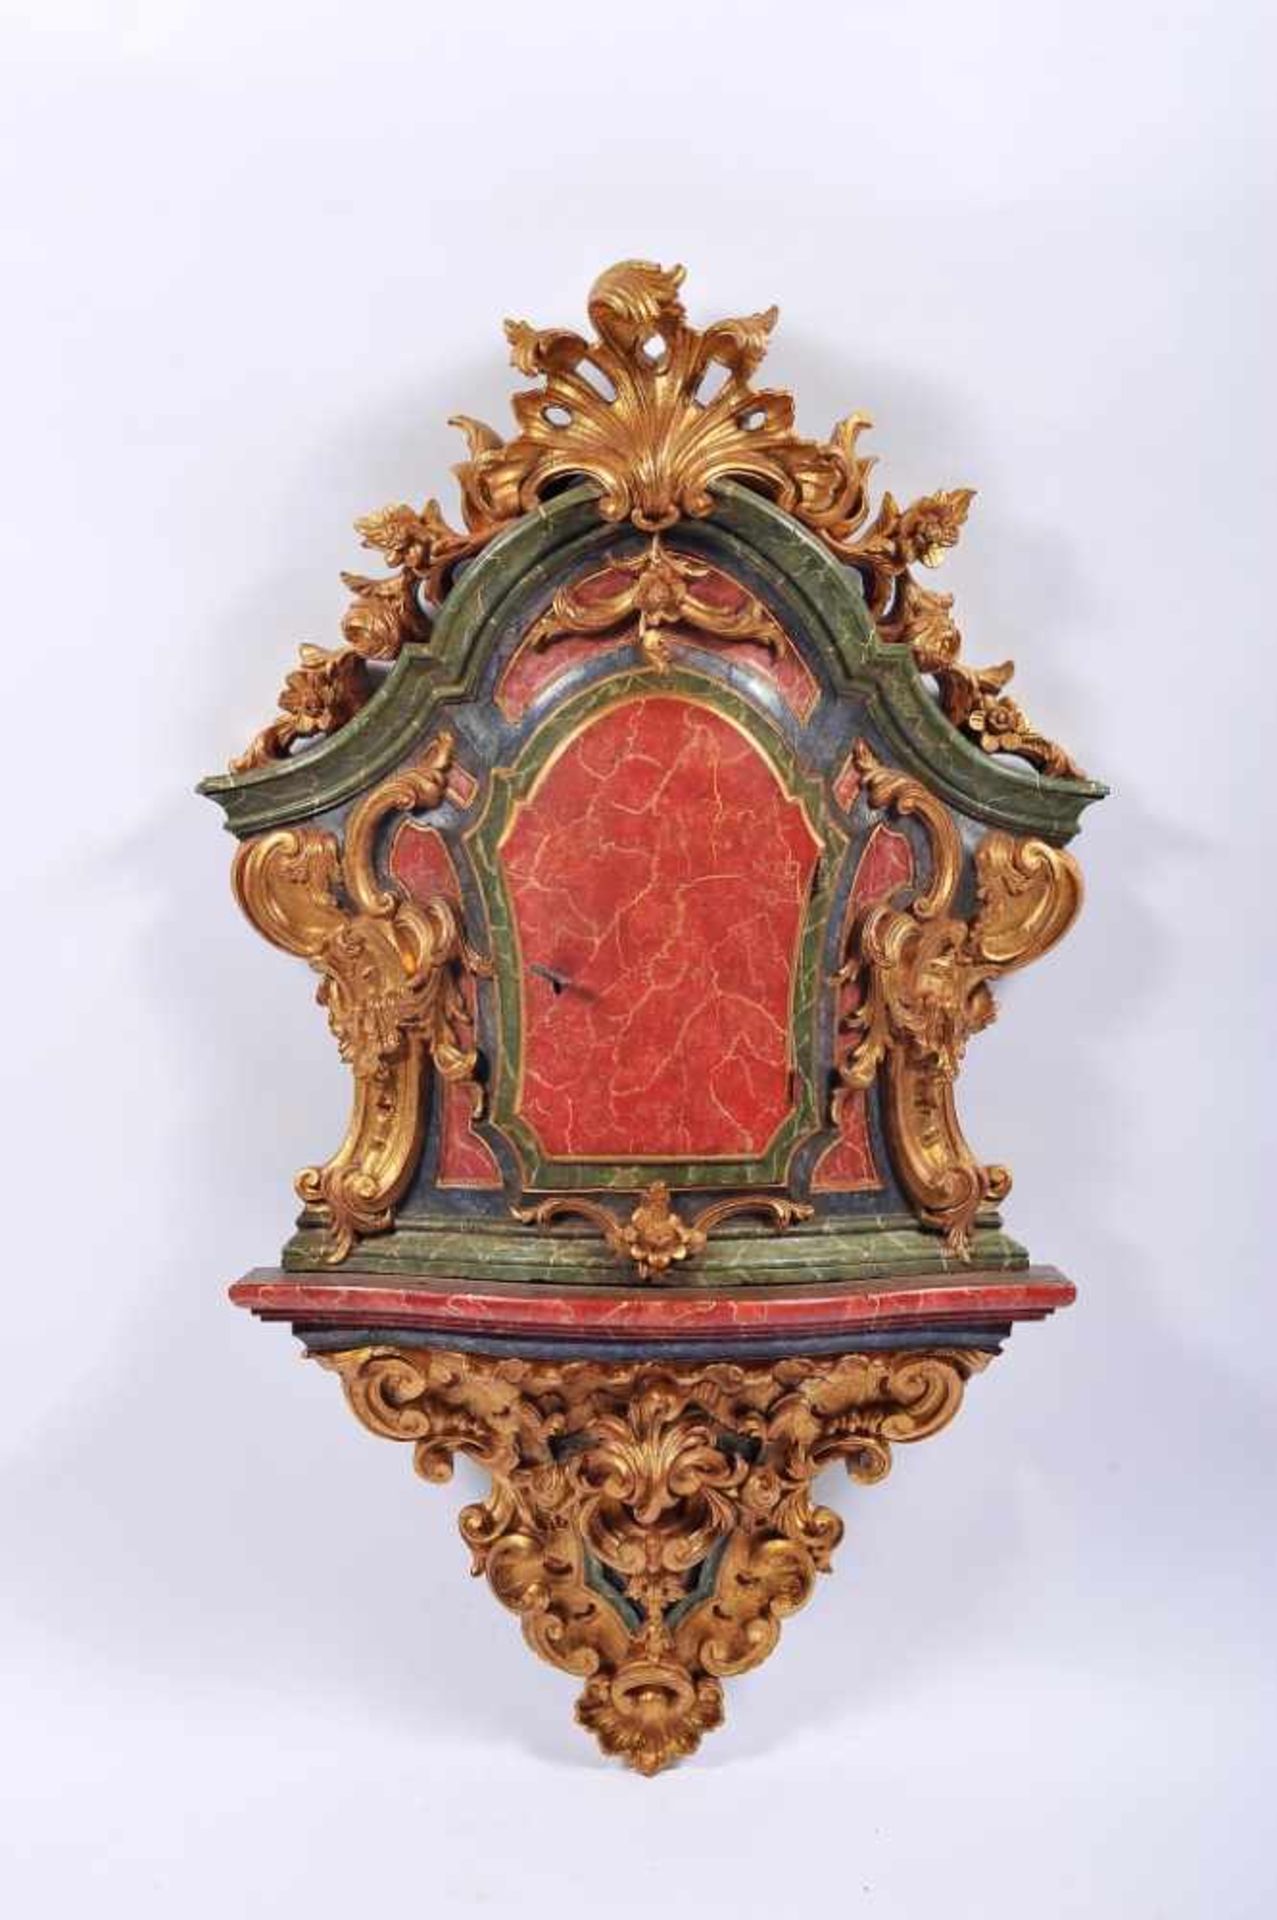 A Suspension Tabernacle FrontA Suspension Tabernacle Front, D. João V, King of Portugal (1706-